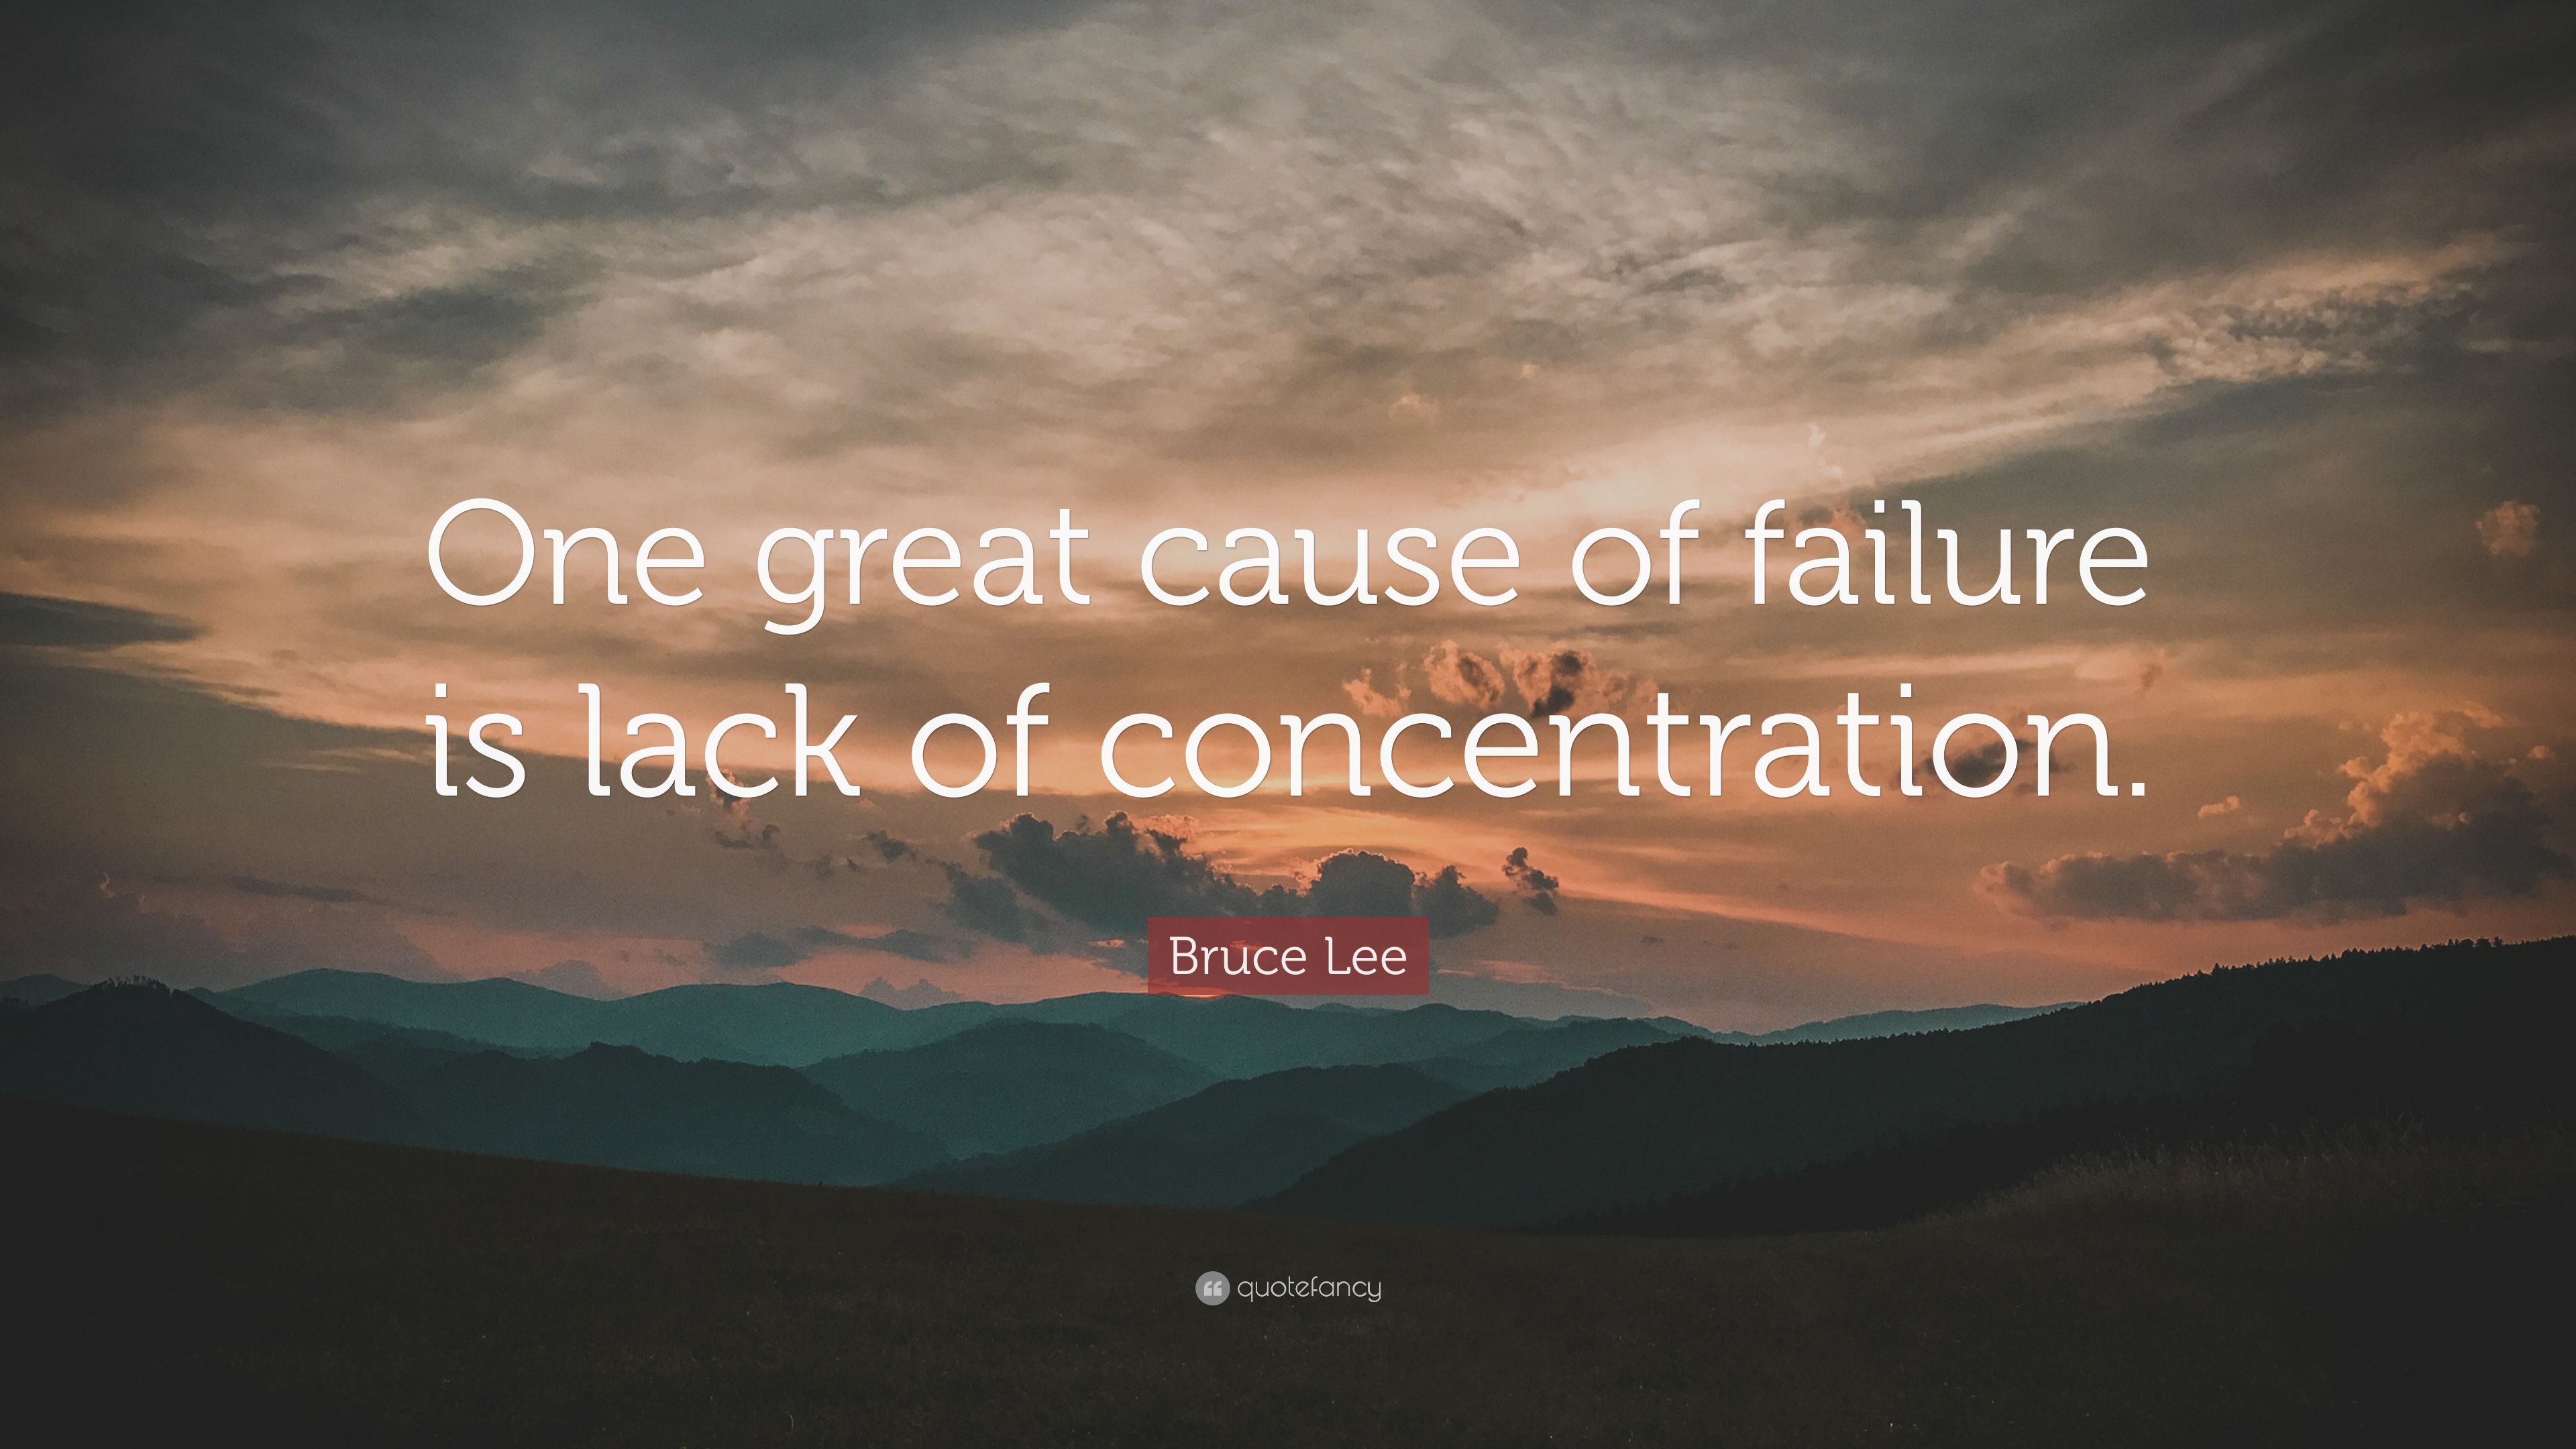 One great cause of failure is lackquotefancy.com